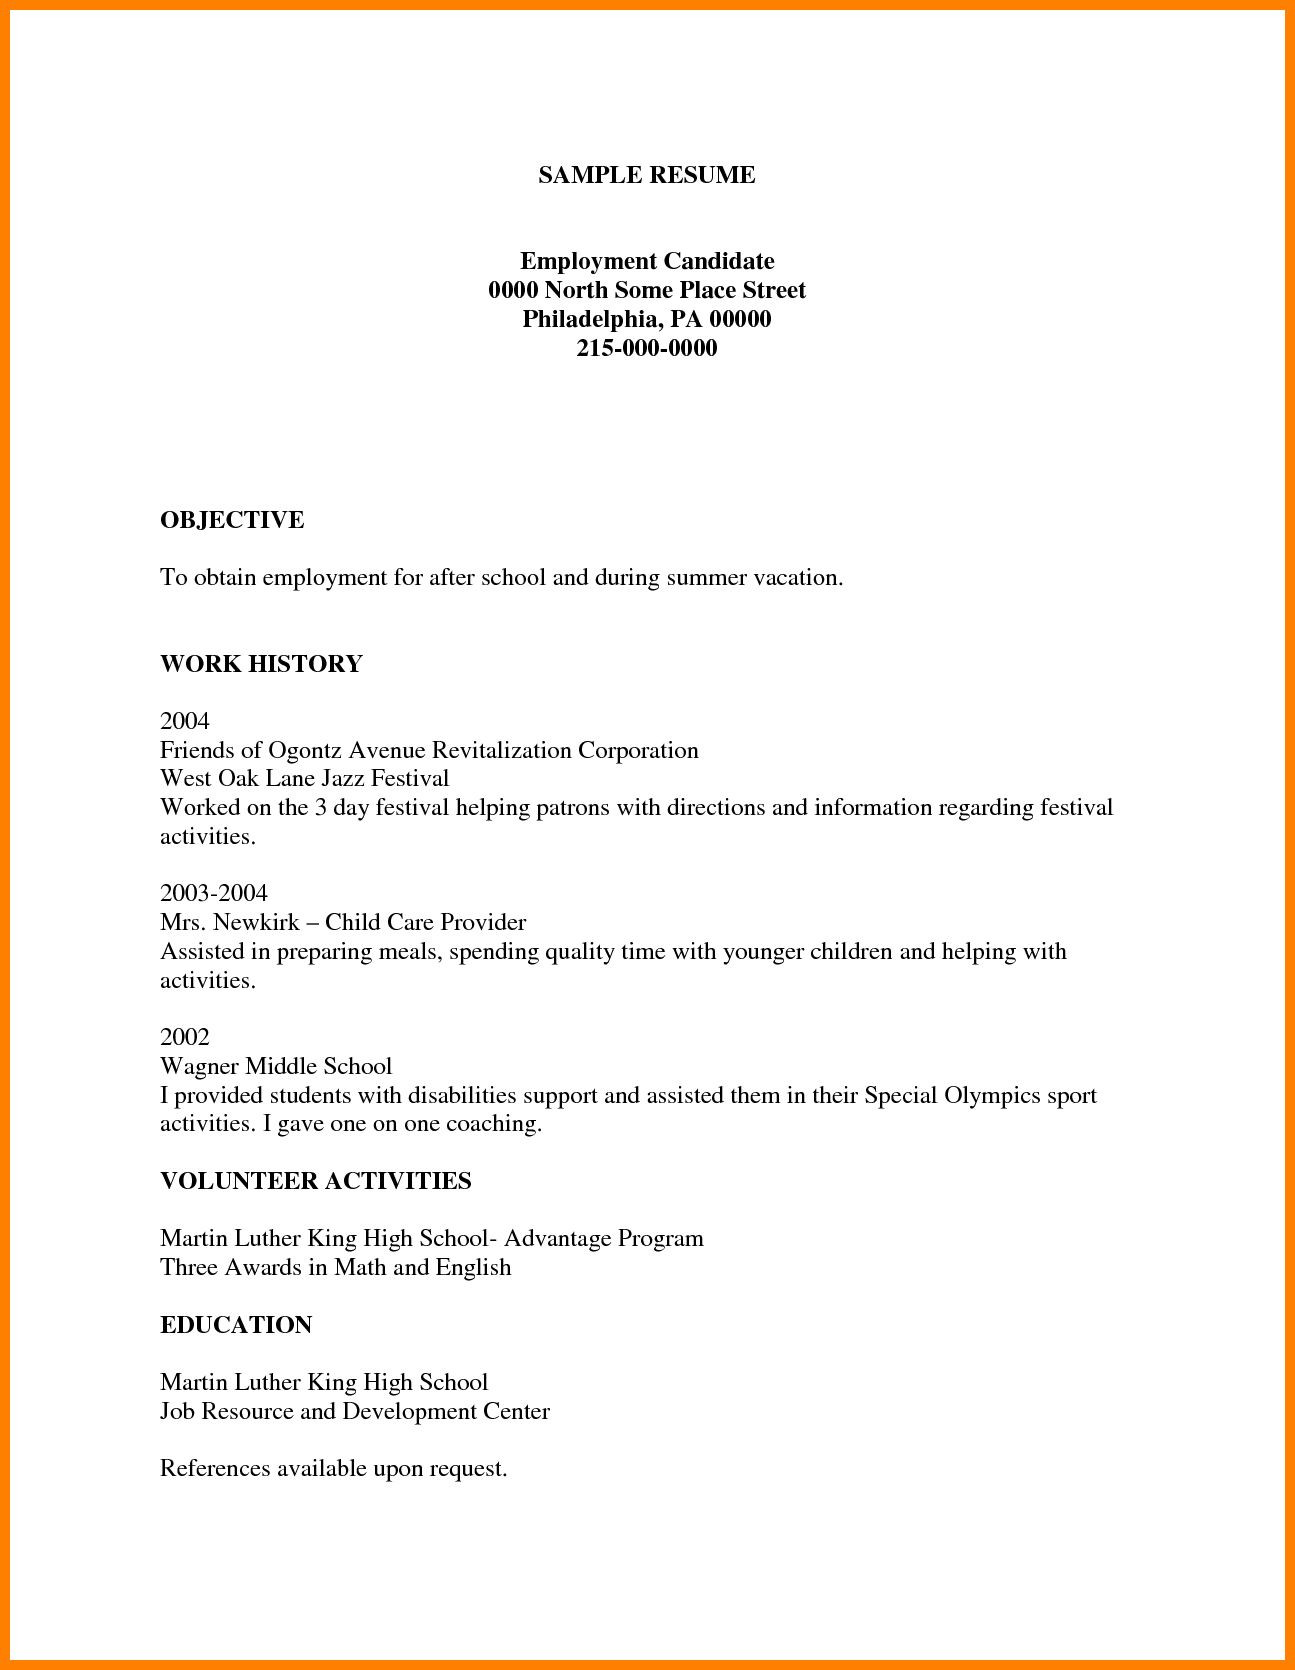 Free Printable Resume Template for High School Students Resume-examples.me Free Printable Resume, Resume Template Free …